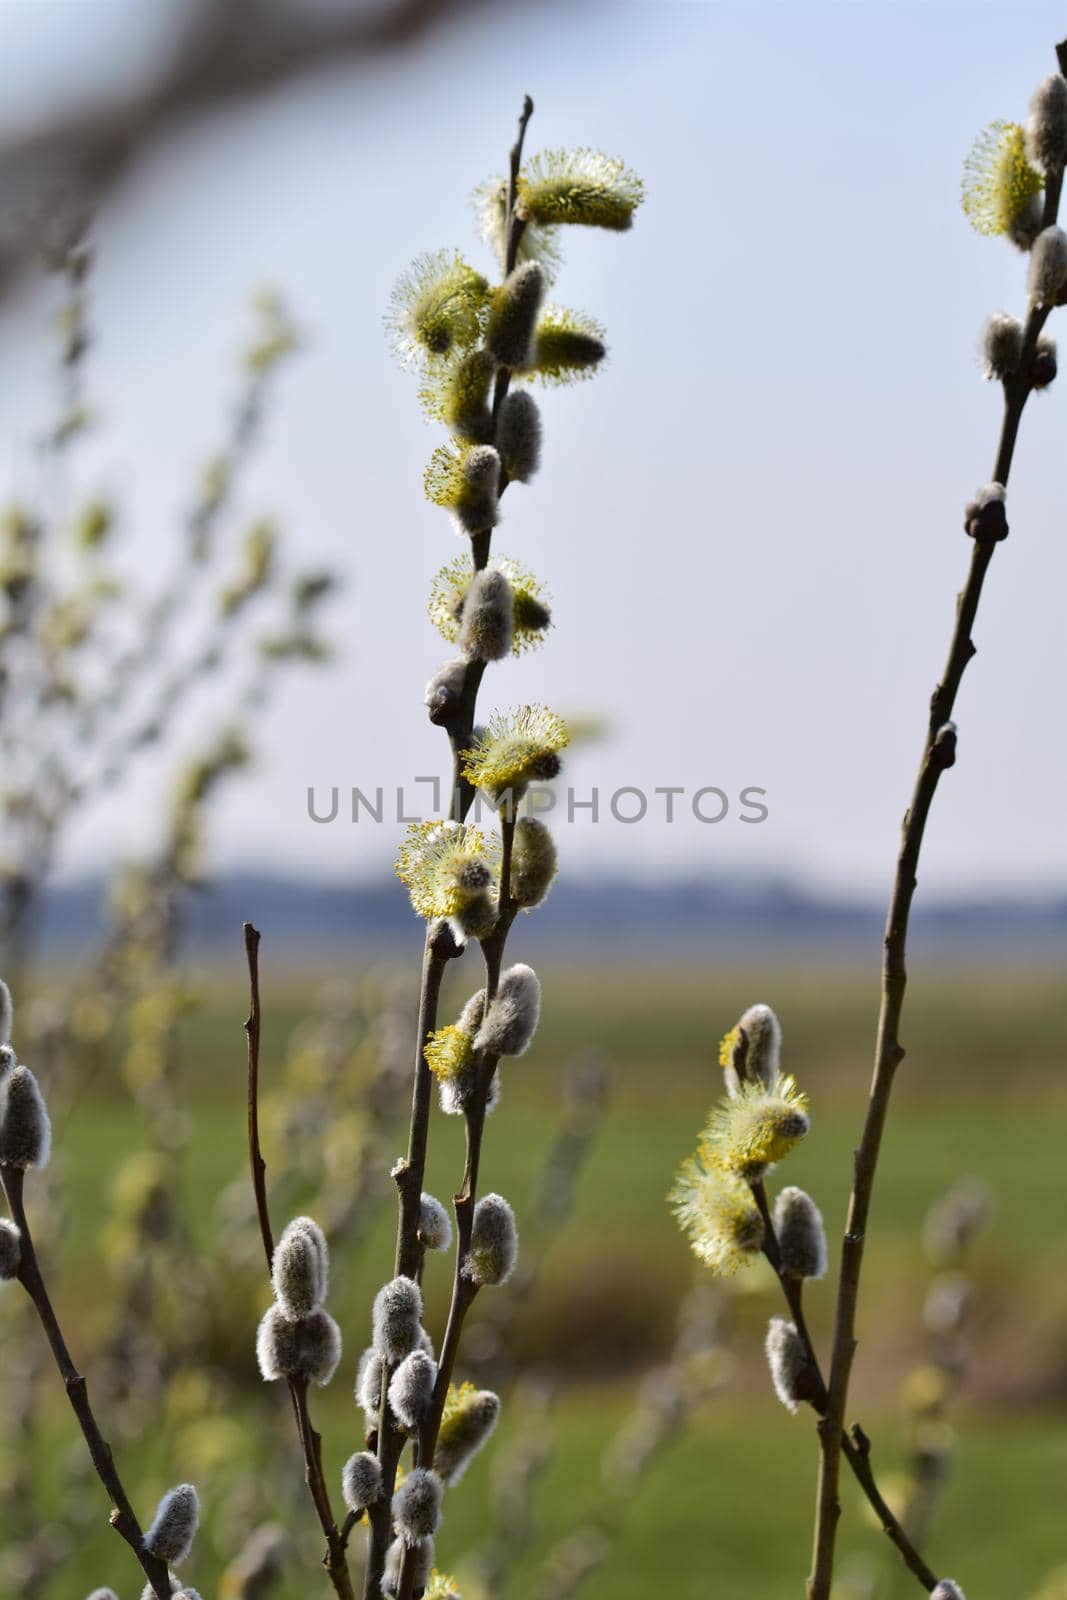 Flowering salix salicaceae against a blurred landscape by Luise123